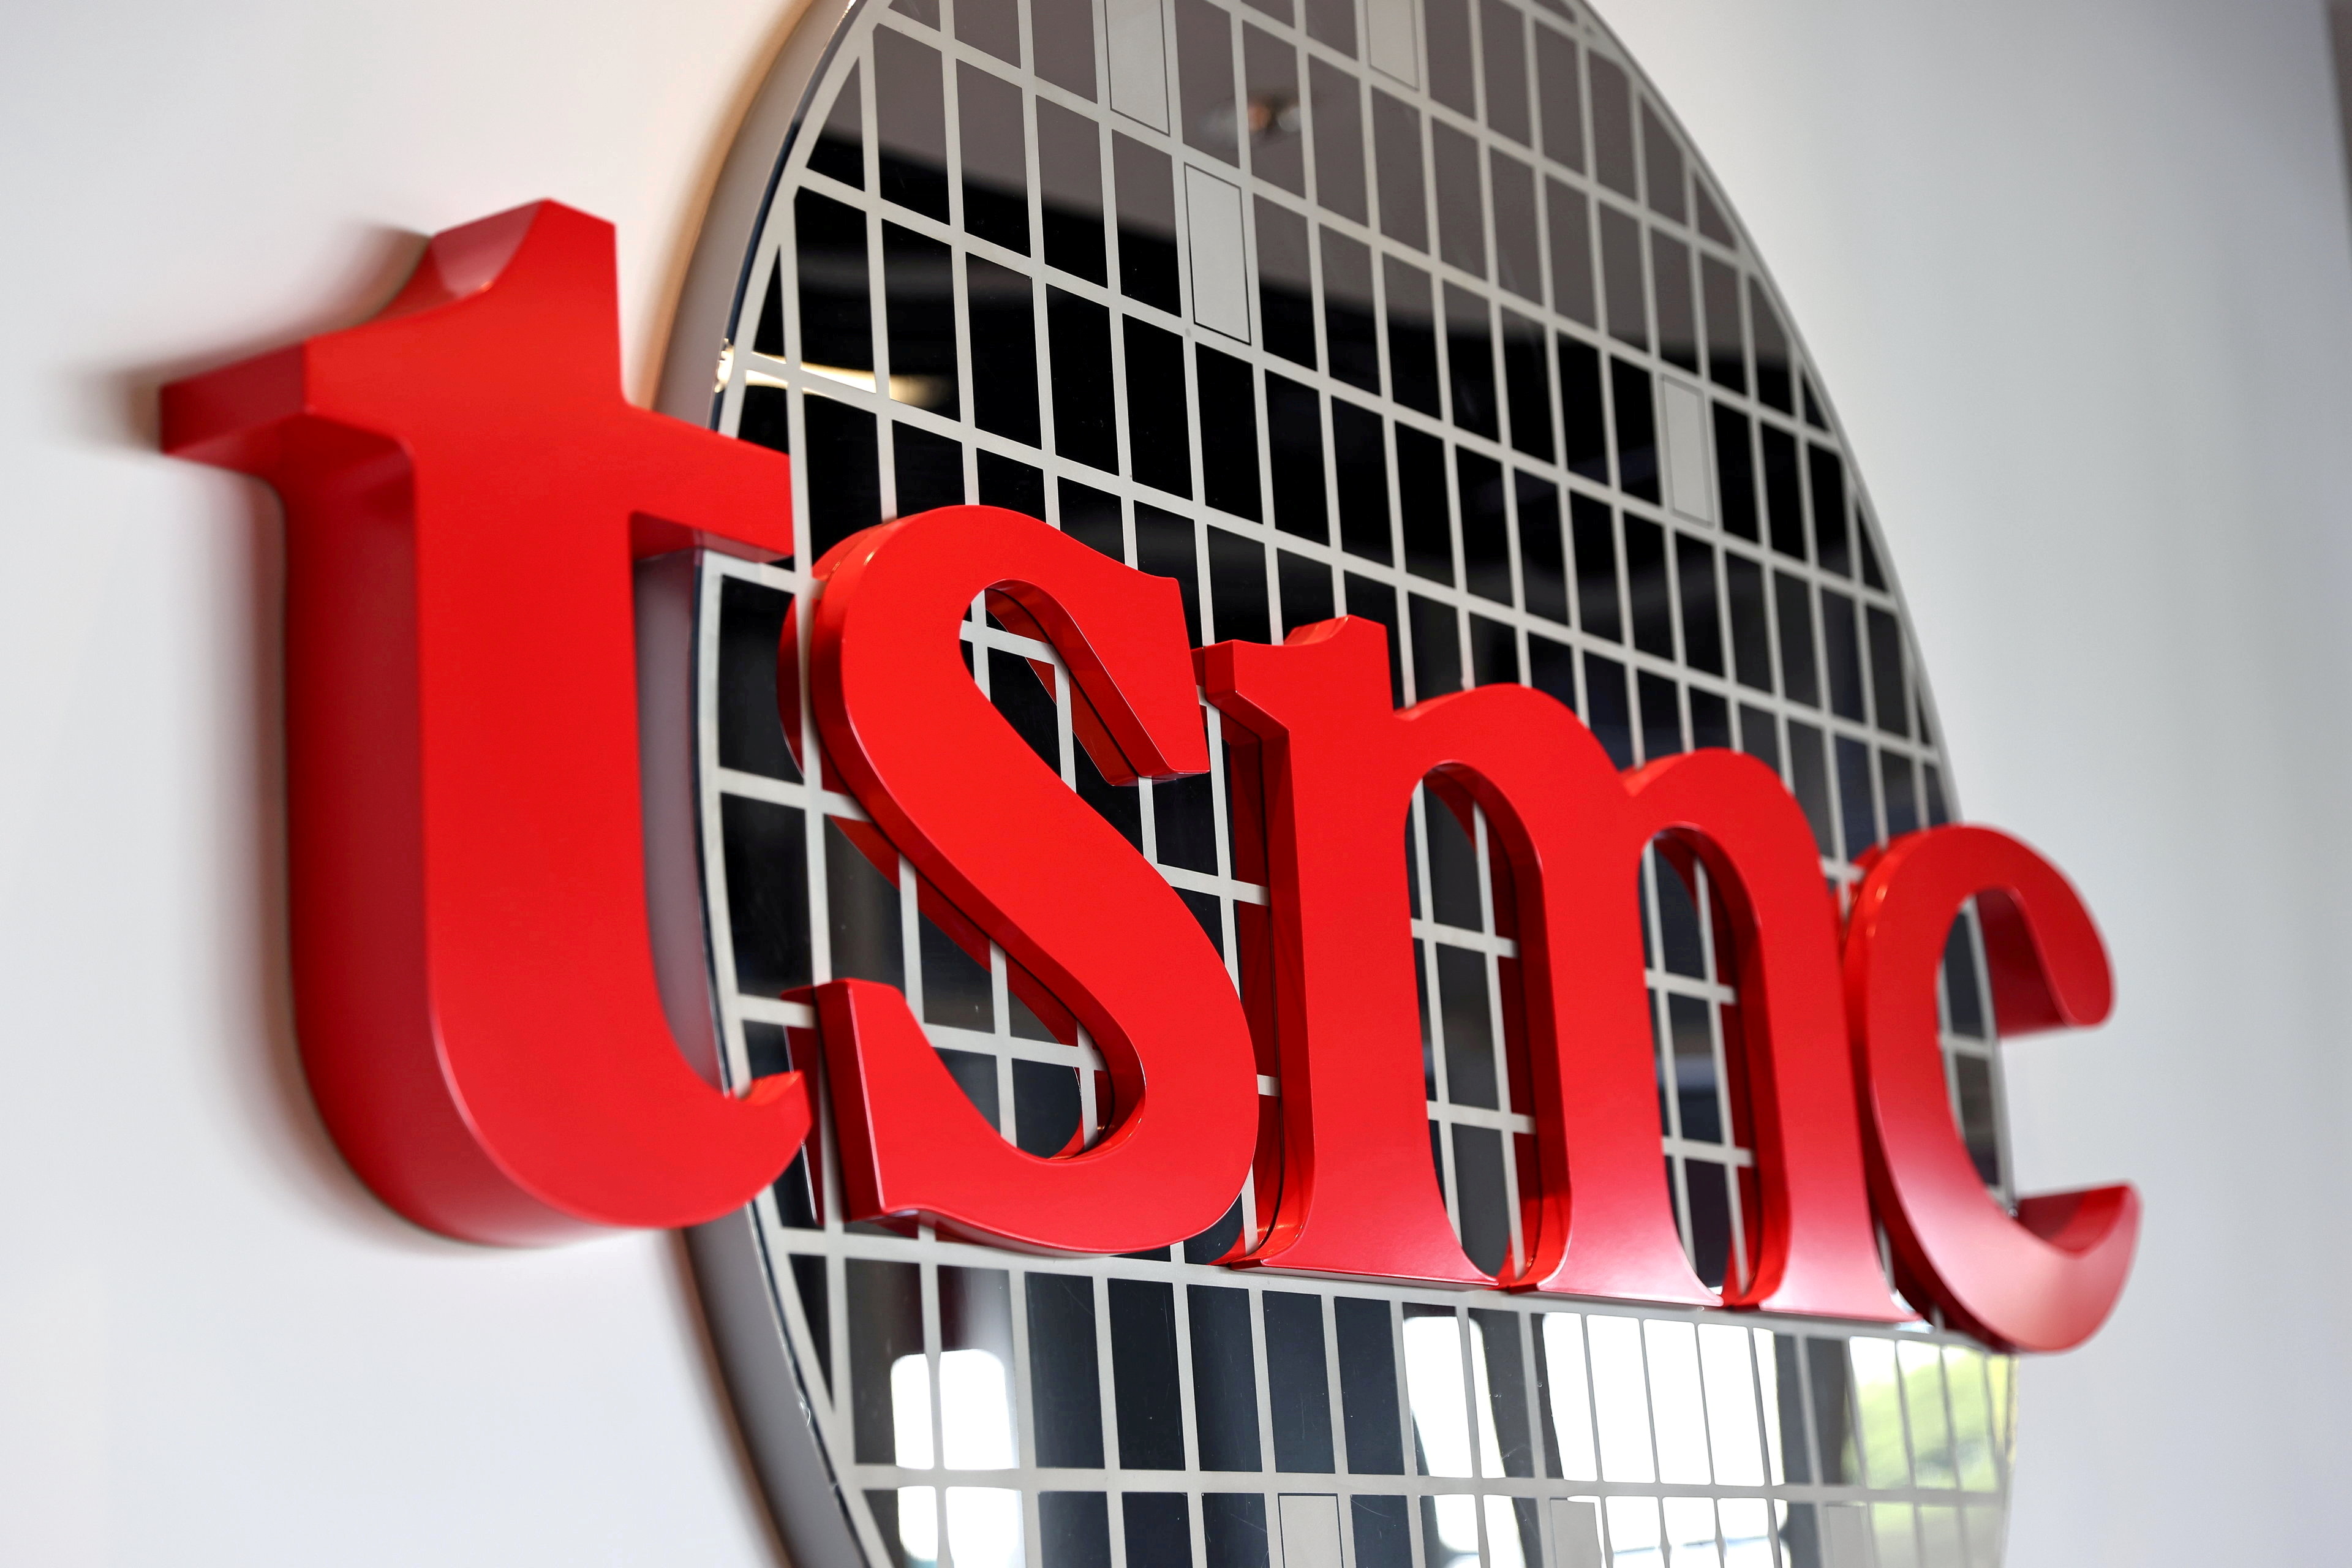 The logo of Taiwan Semiconductor Manufacturing Co (TSMC) is pictured at its headquarters, in Hsinchu, Taiwan, Jan. 19, 2021. REUTERS/Ann Wang